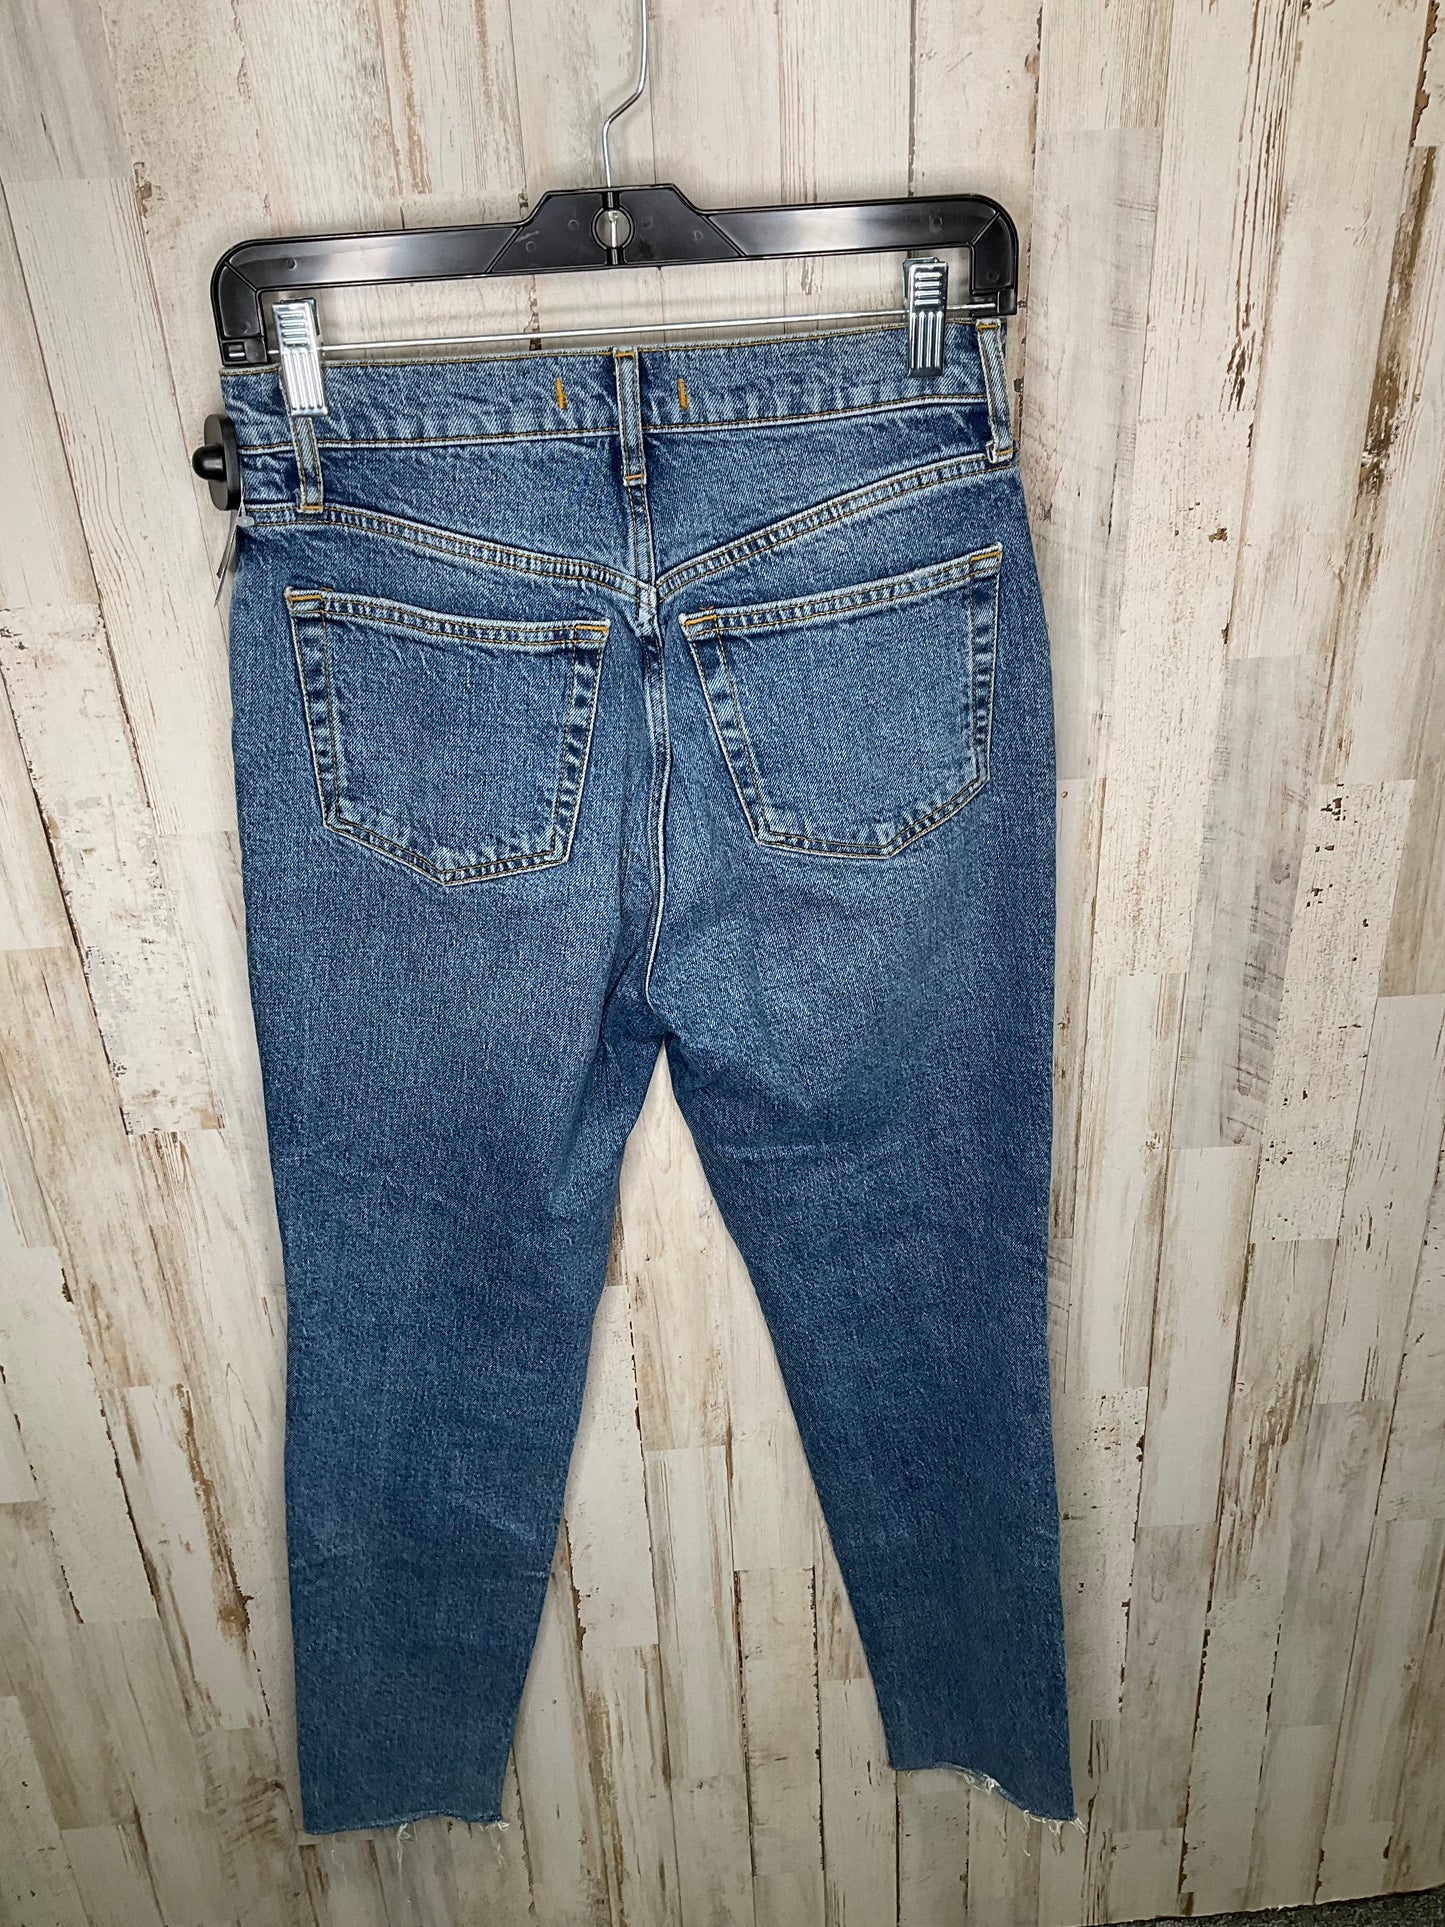 Blue Denim Jeans Boot Cut We The Free, Size 8